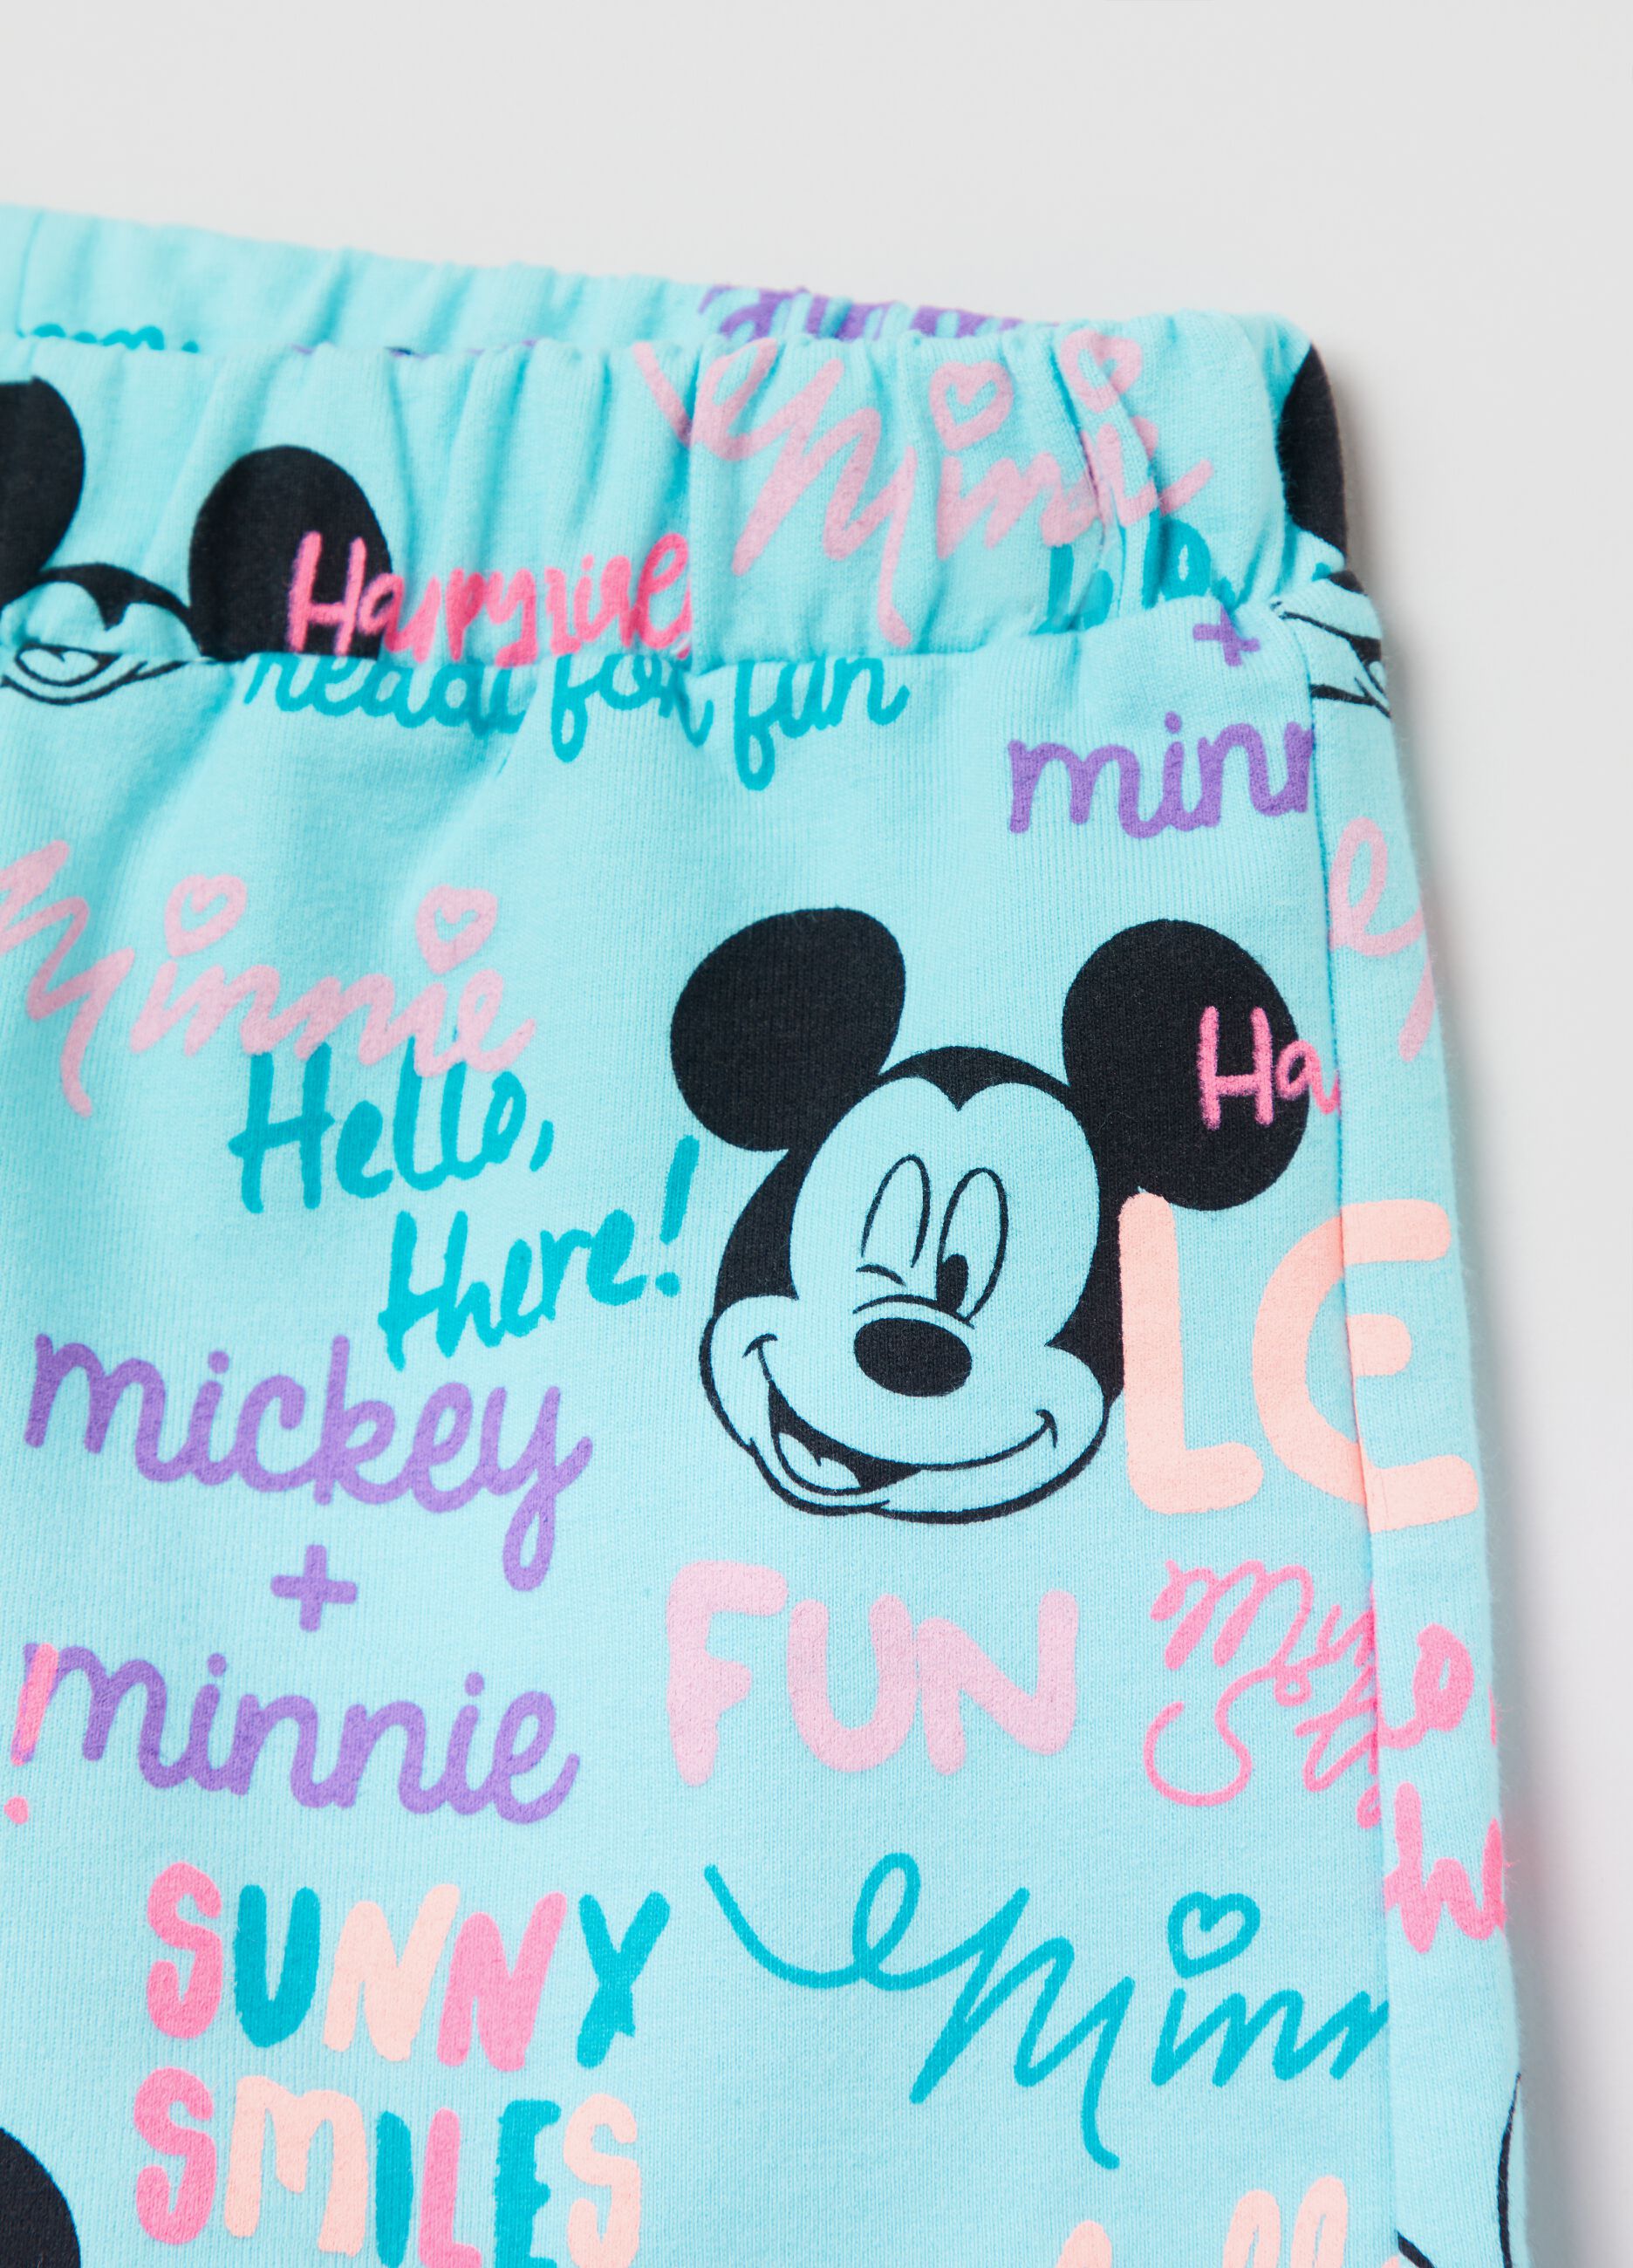 Shorts with Disney Minnie and Mickey Mouse print